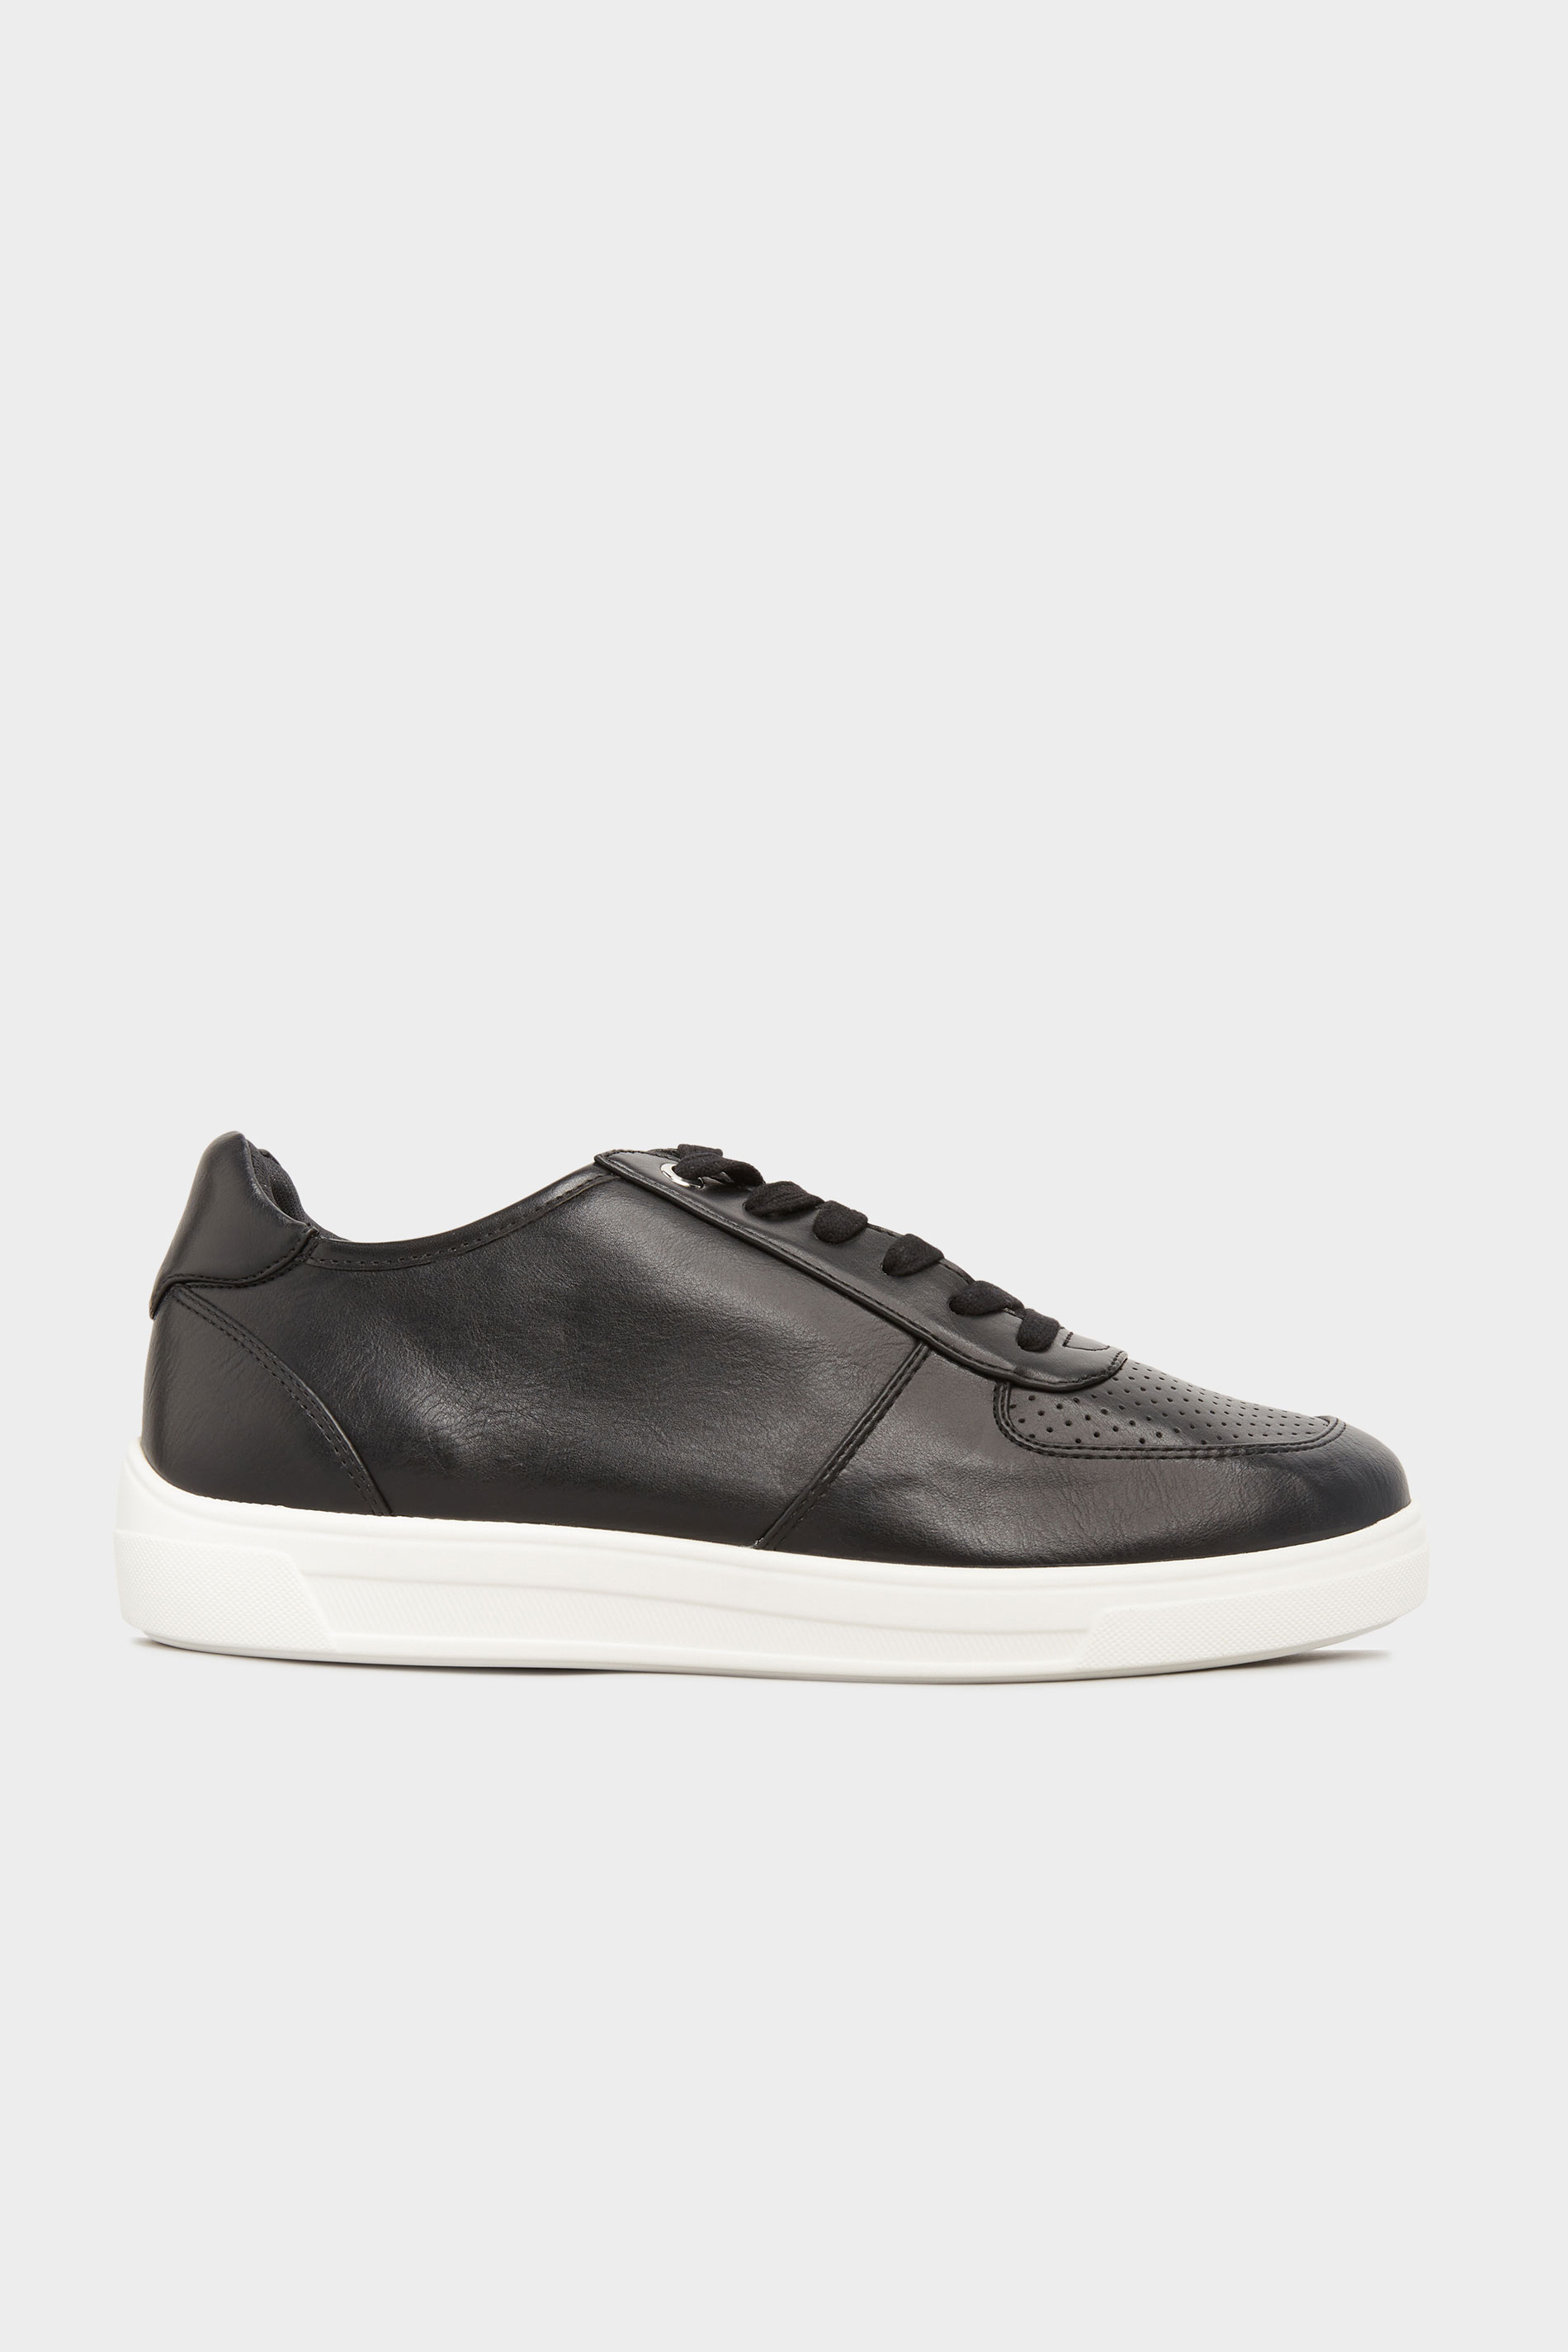 Black Vegan Leather Lace Up Trainers In Extra Wide Fit | Long Tall Sally